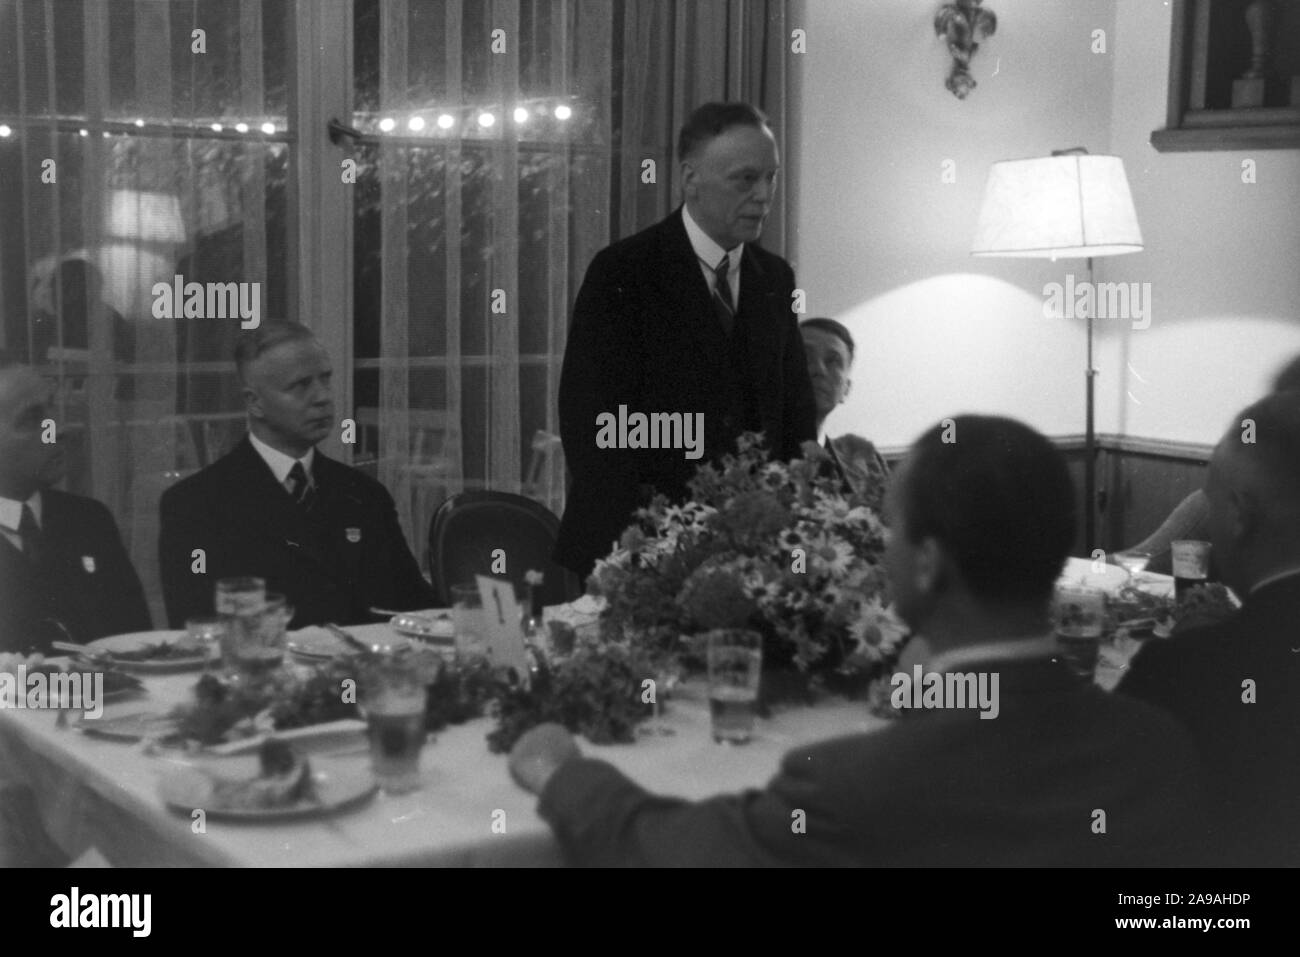 A meeting in the Harnack-Haus in Berlin-Dahlem, Germany 1930s. Stock Photo